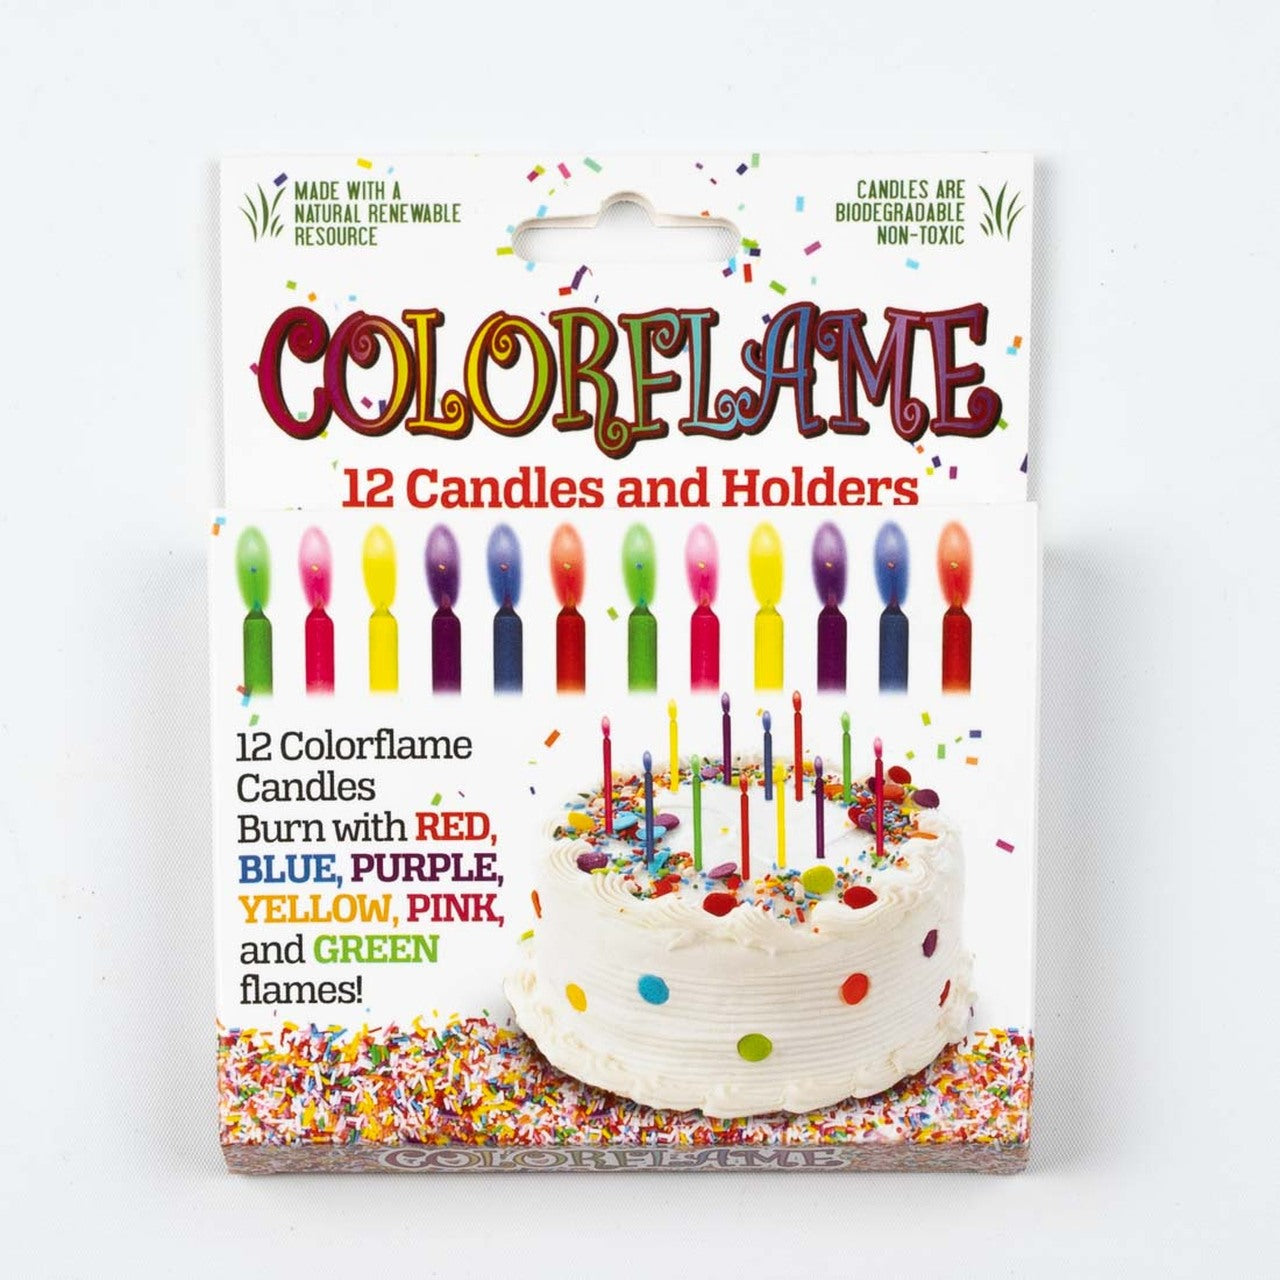 Colorflame 12 Candles